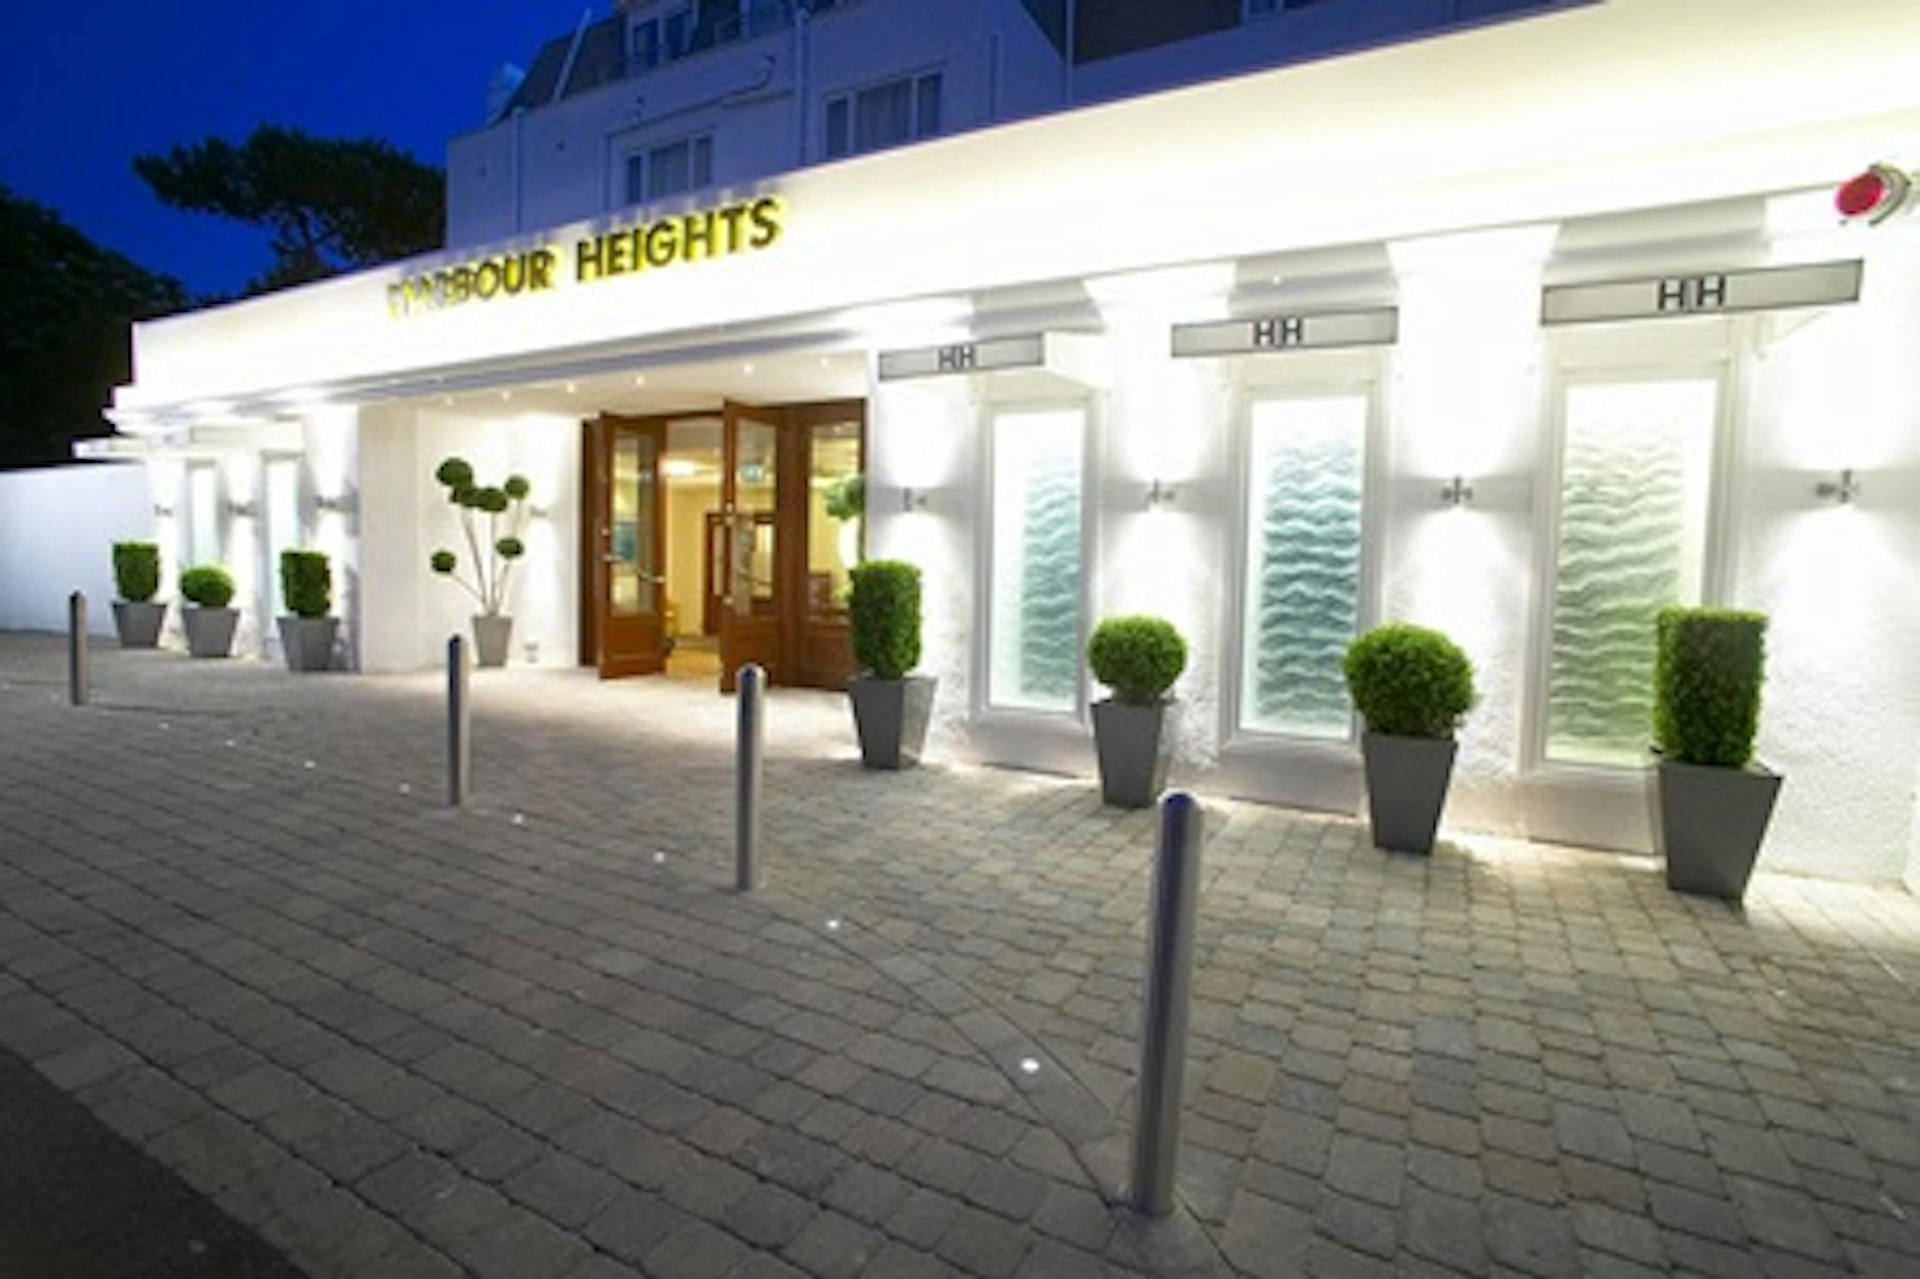 Two Night Winter Coastal Break for Two at the 4* Harbour Heights Hotel, Poole 2